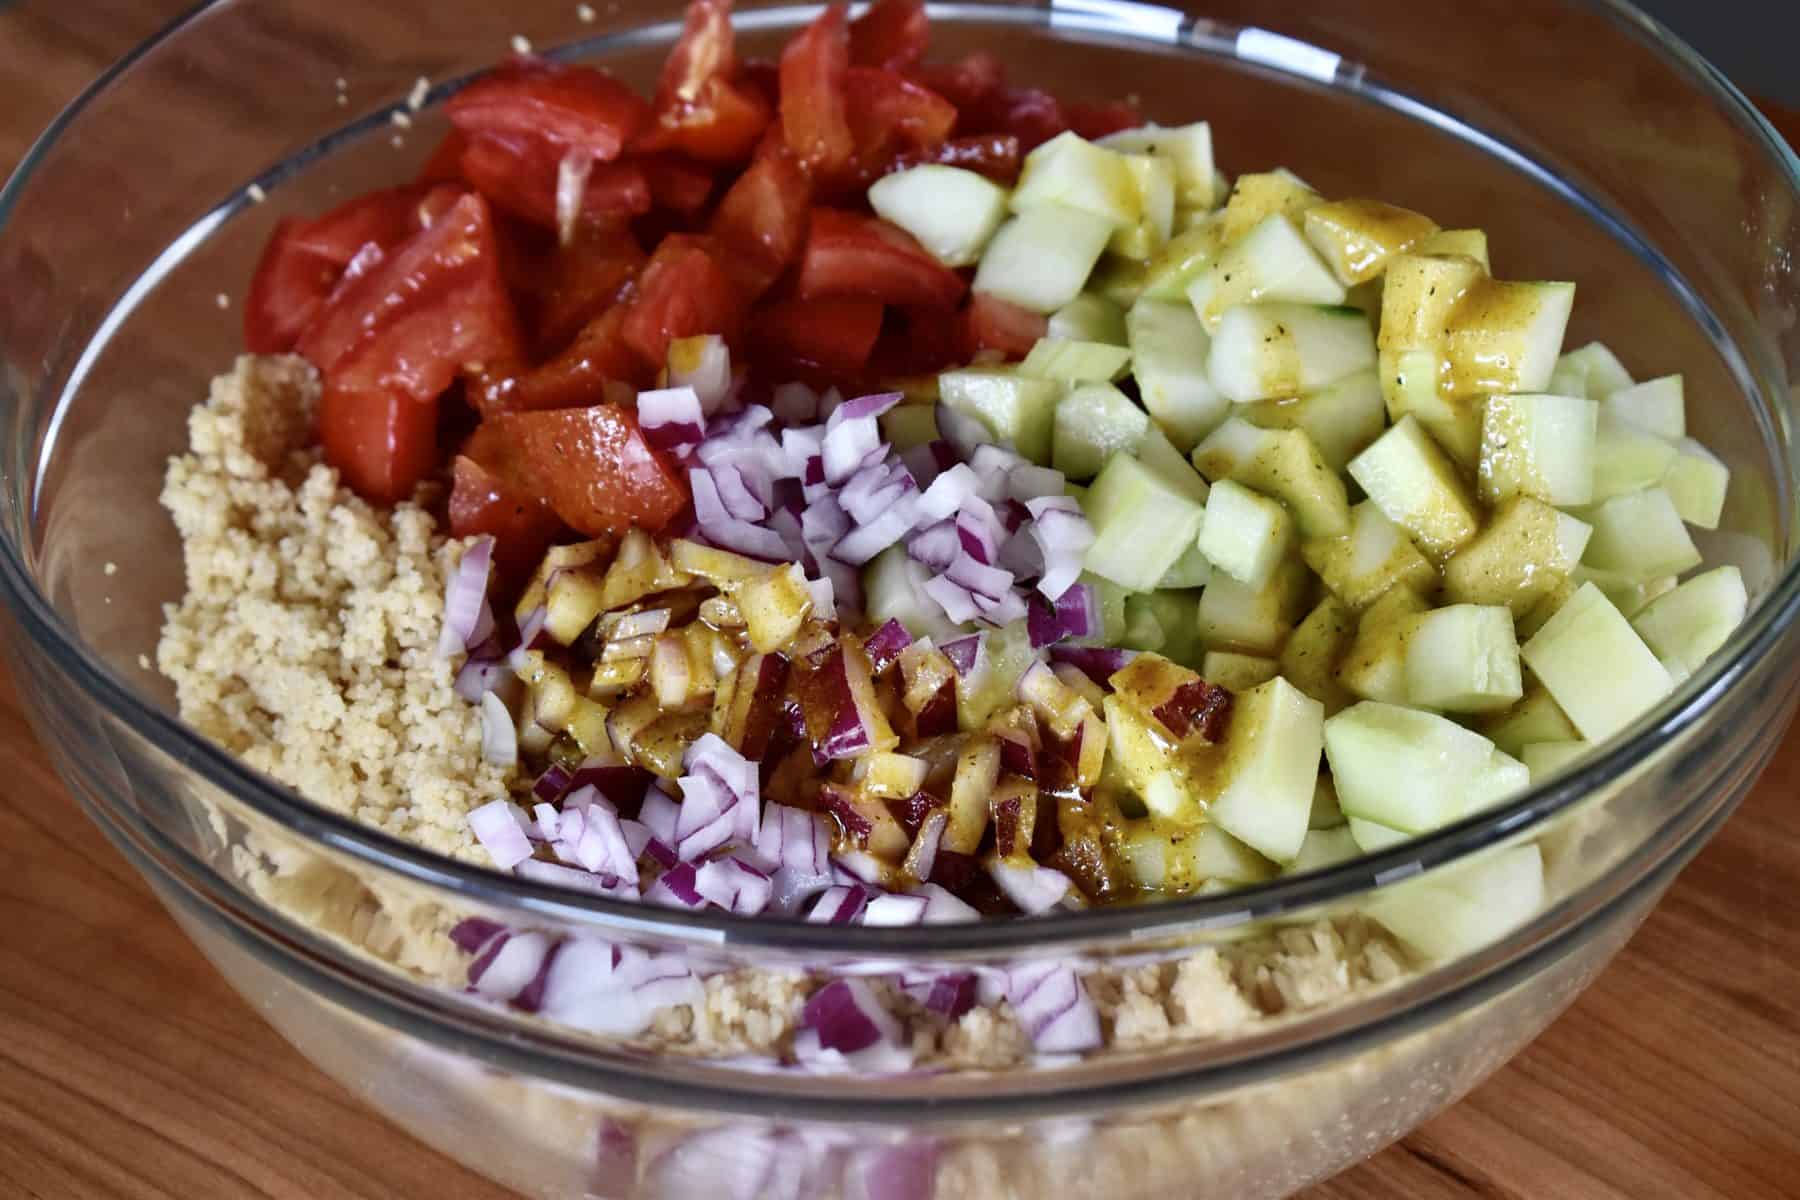 Dressing poured over the veggies in a glass bowl. 